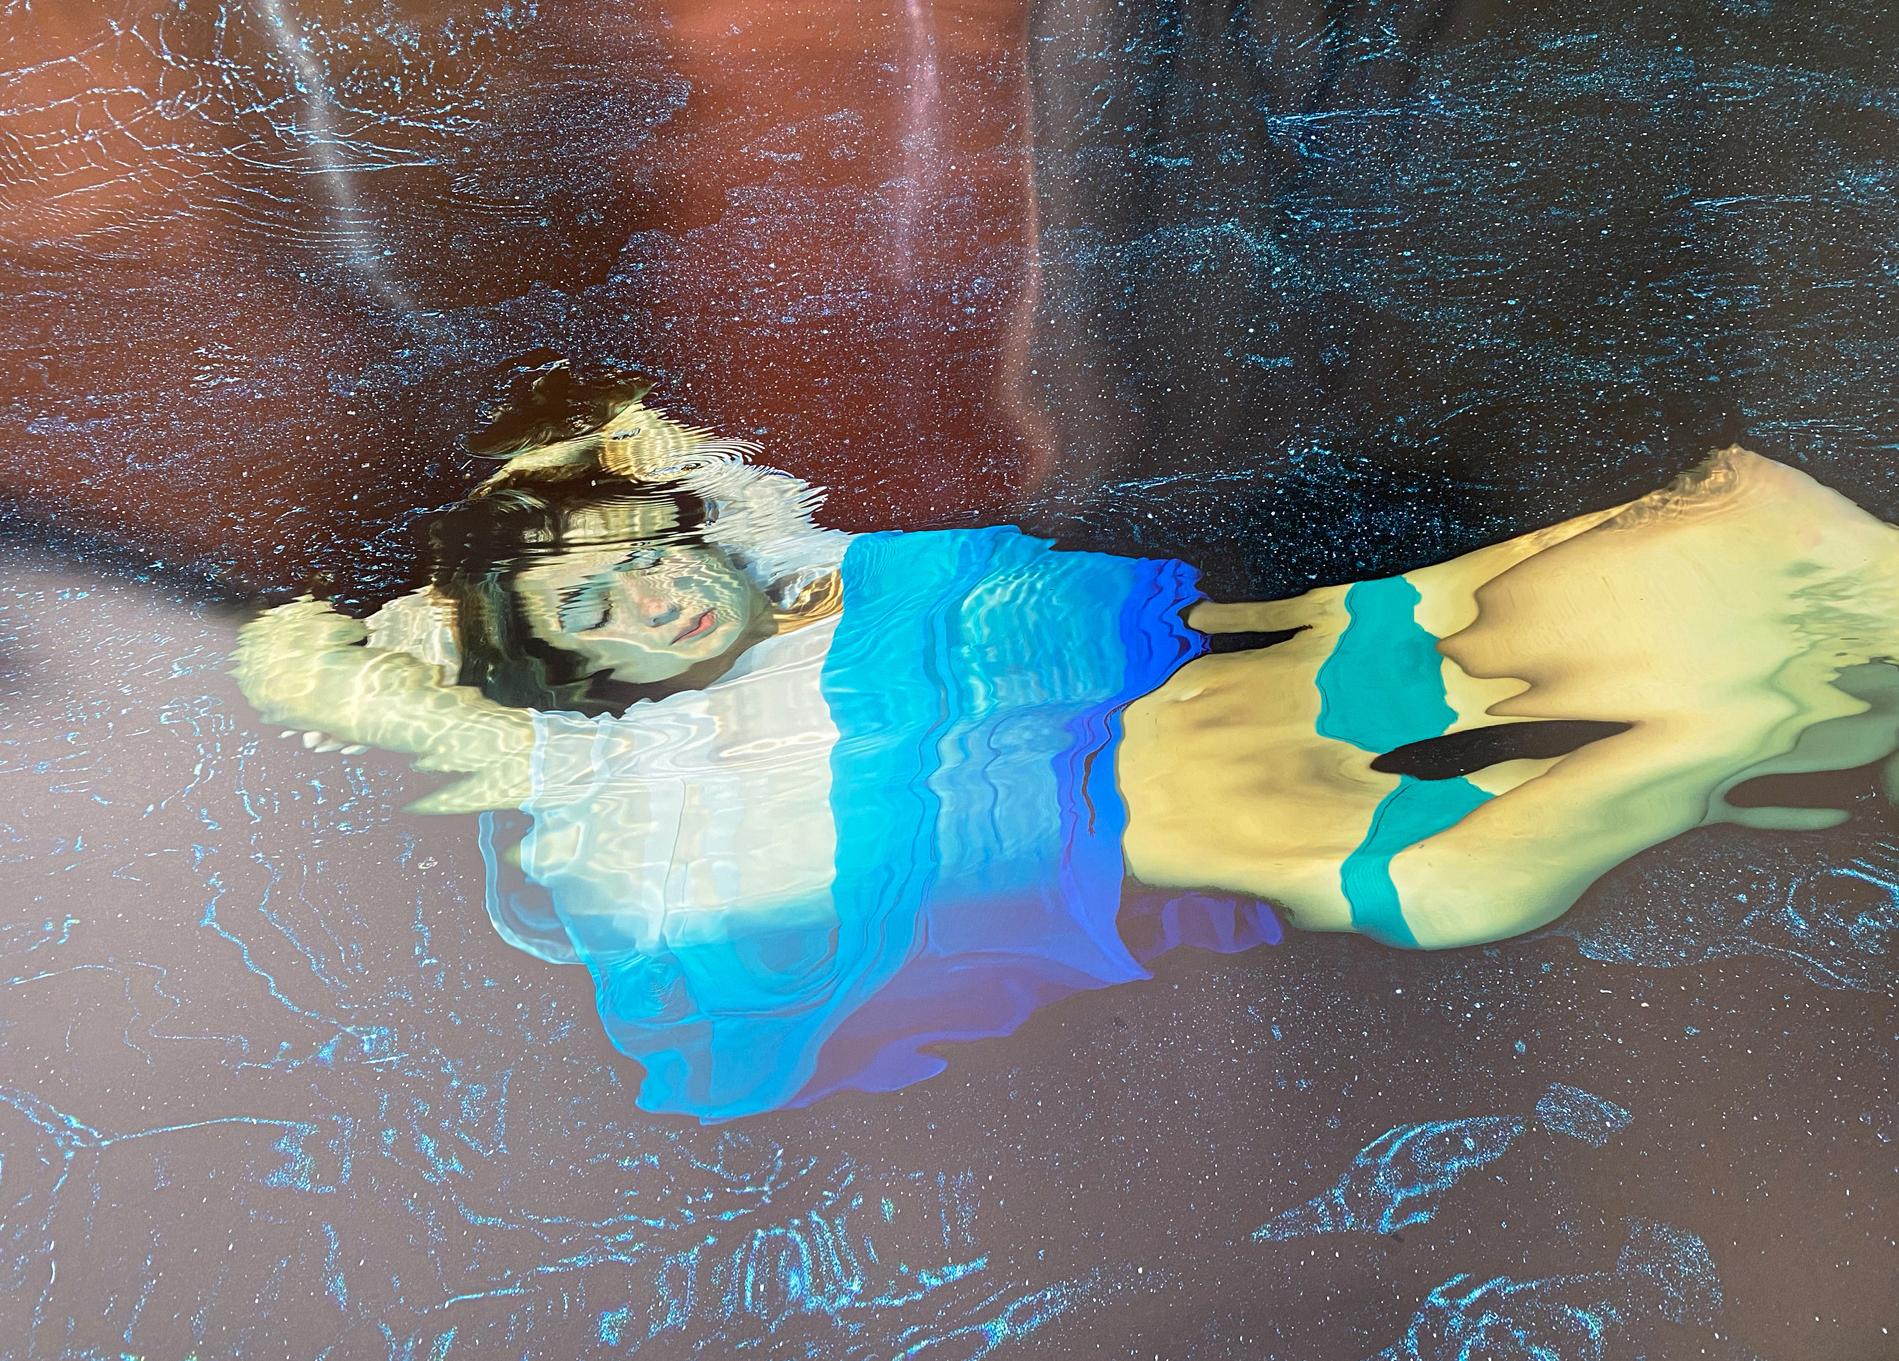 Anesthesia - underwater photograph series REFLECTIONS - archival pigment 43x64